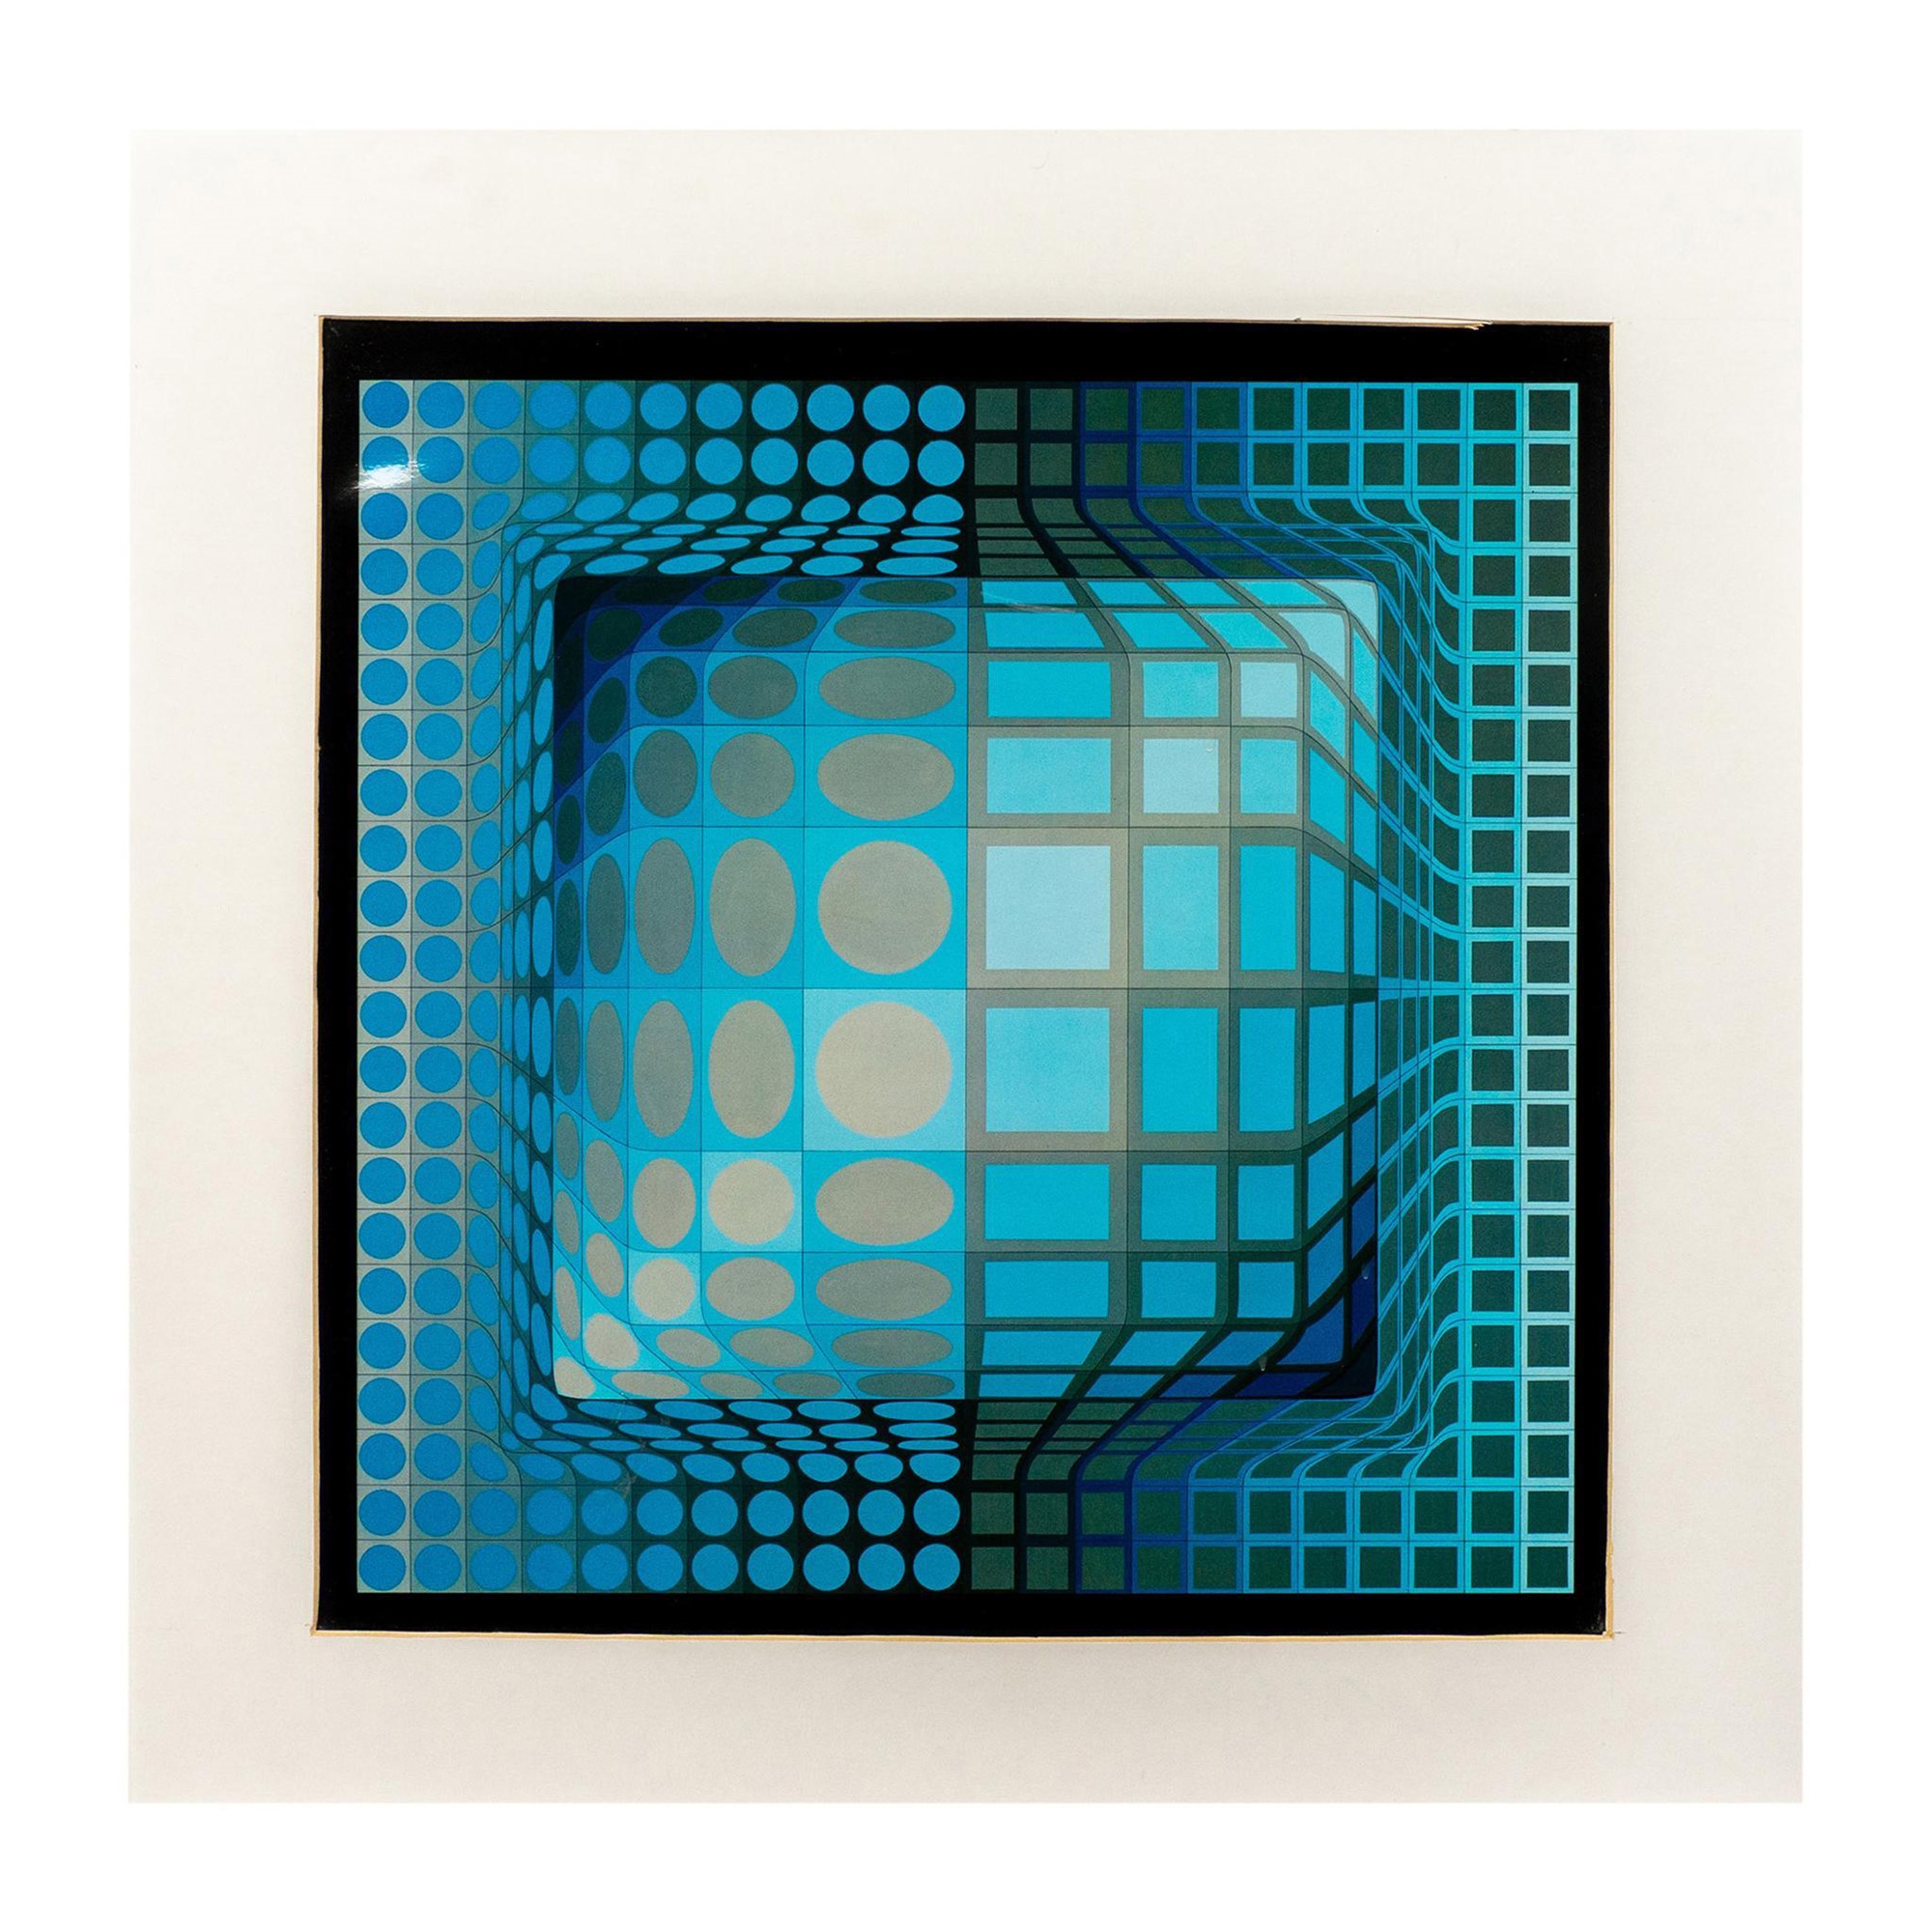 https://media.mutualart.com/Images/2023_11/01/09/092356007/victor-vasarely--color-heliogravure-on-p-2JV89.Jpeg?w=768